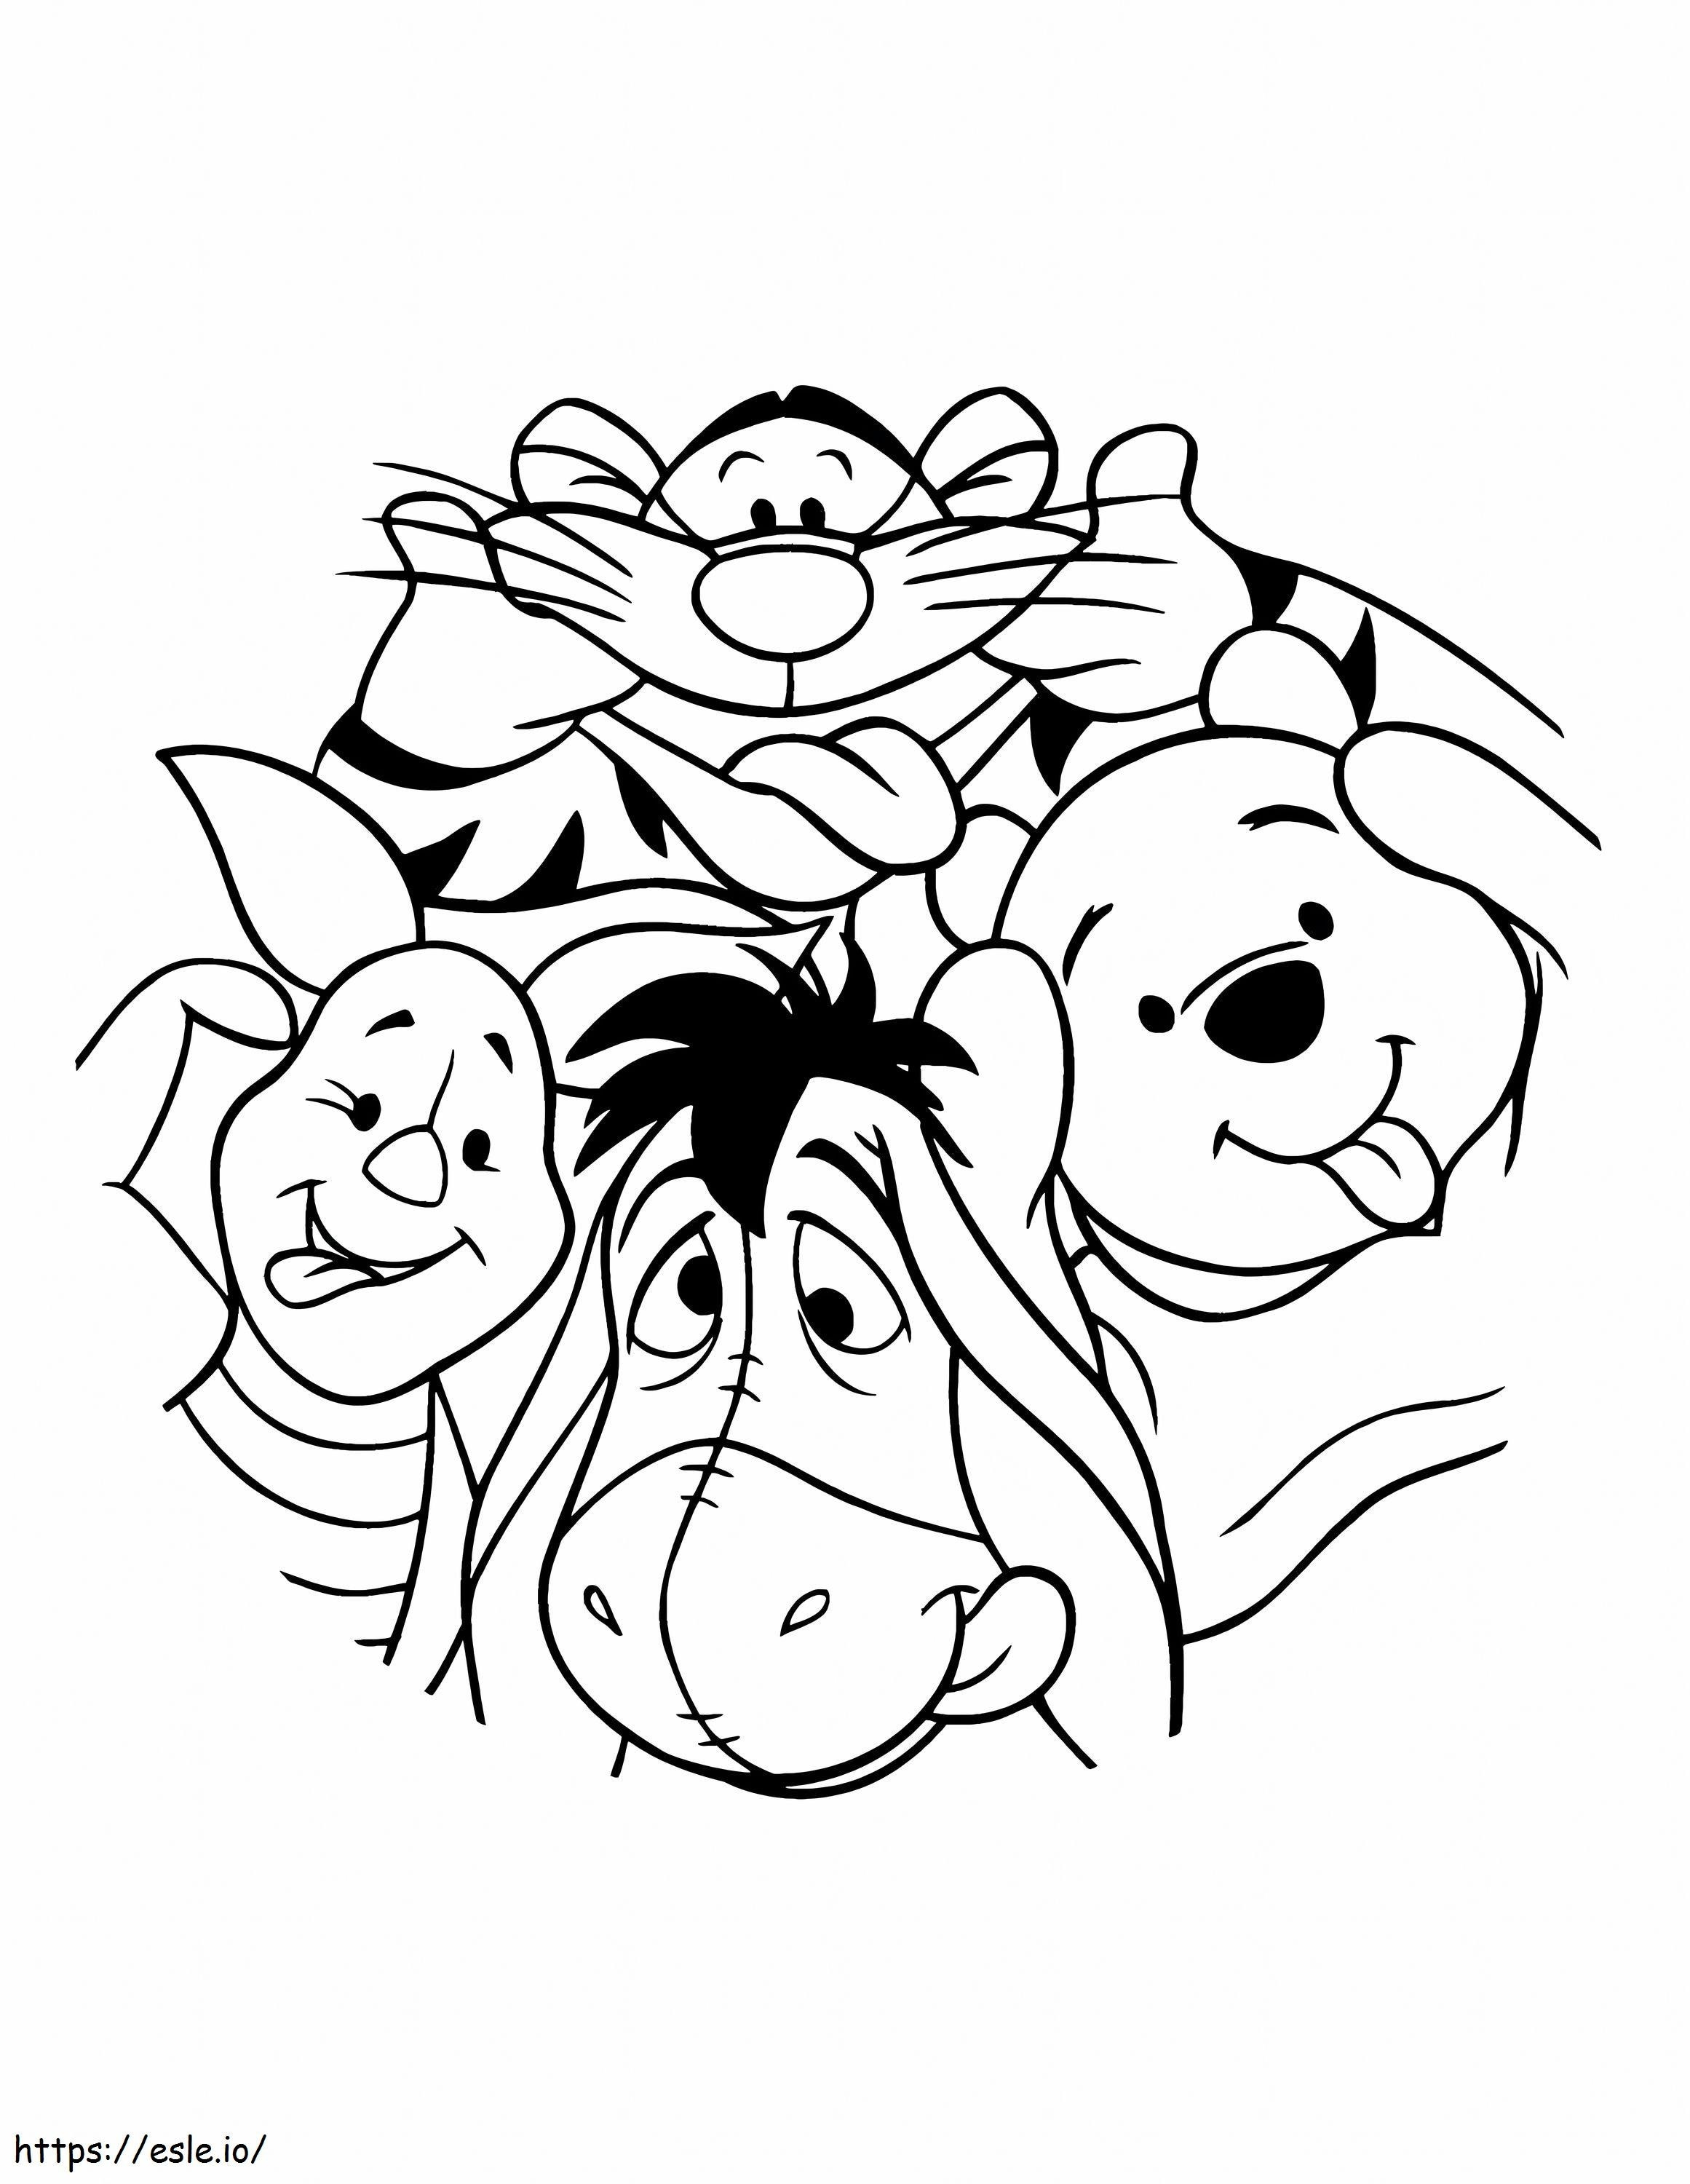 Bear disney pooh and friends coloring page